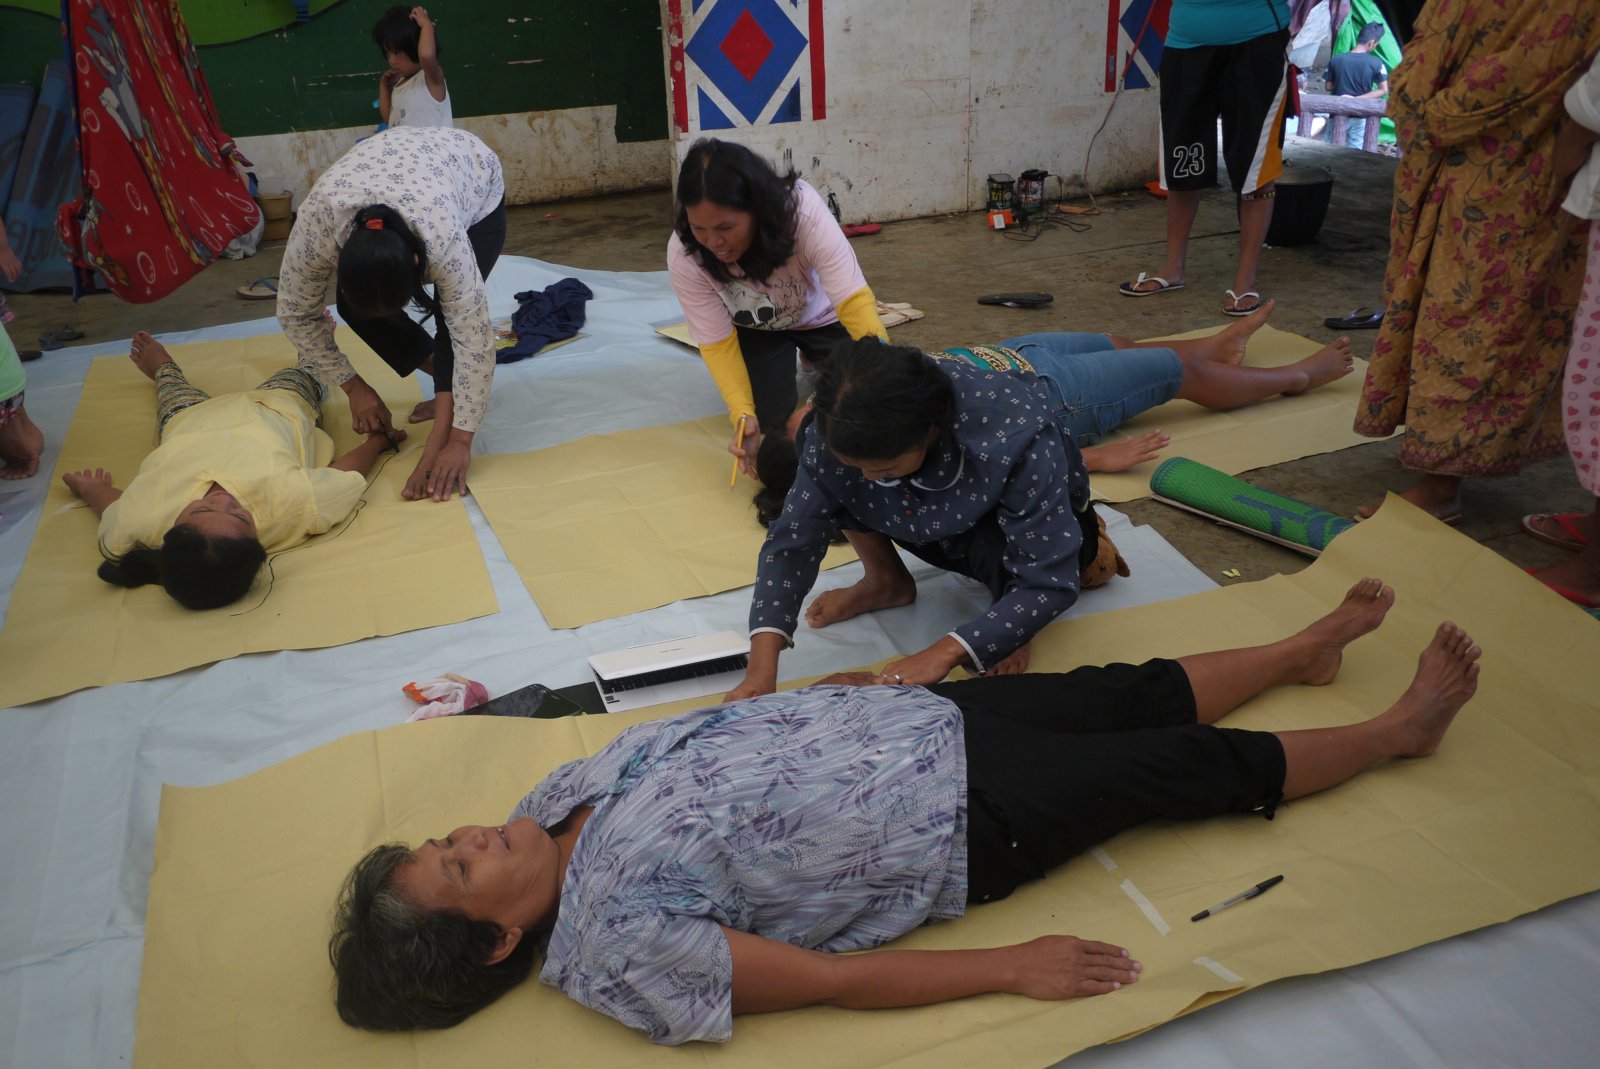 Participants take turns in tracing the contours of each other's bodies. Photo courtesy of MIILS